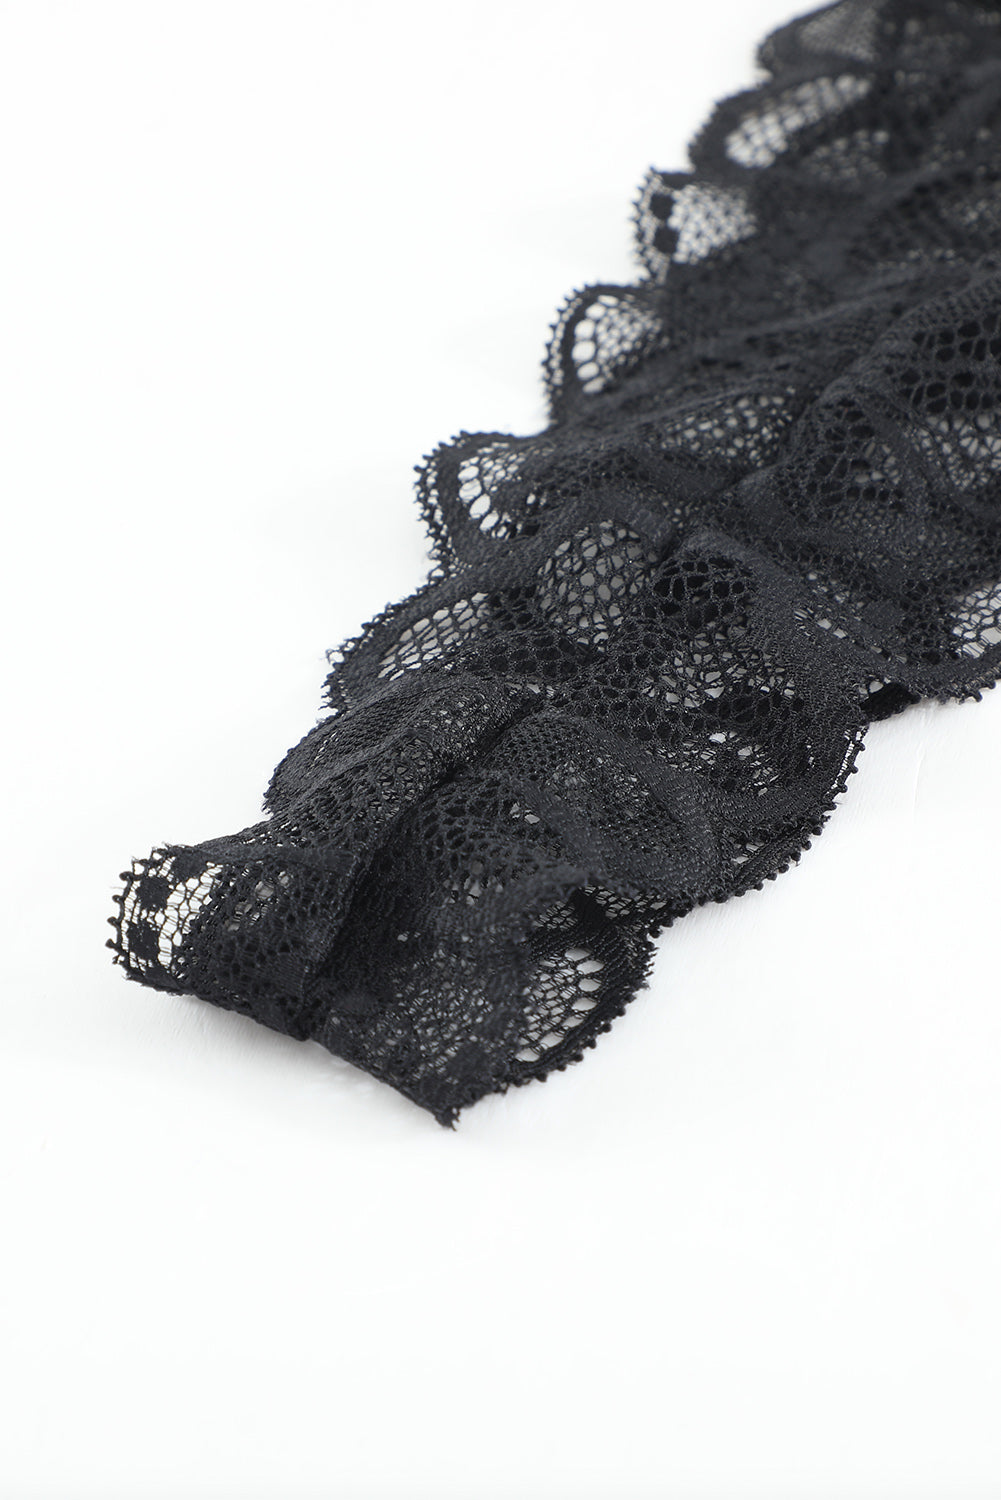 a piece of black lace on a white surface